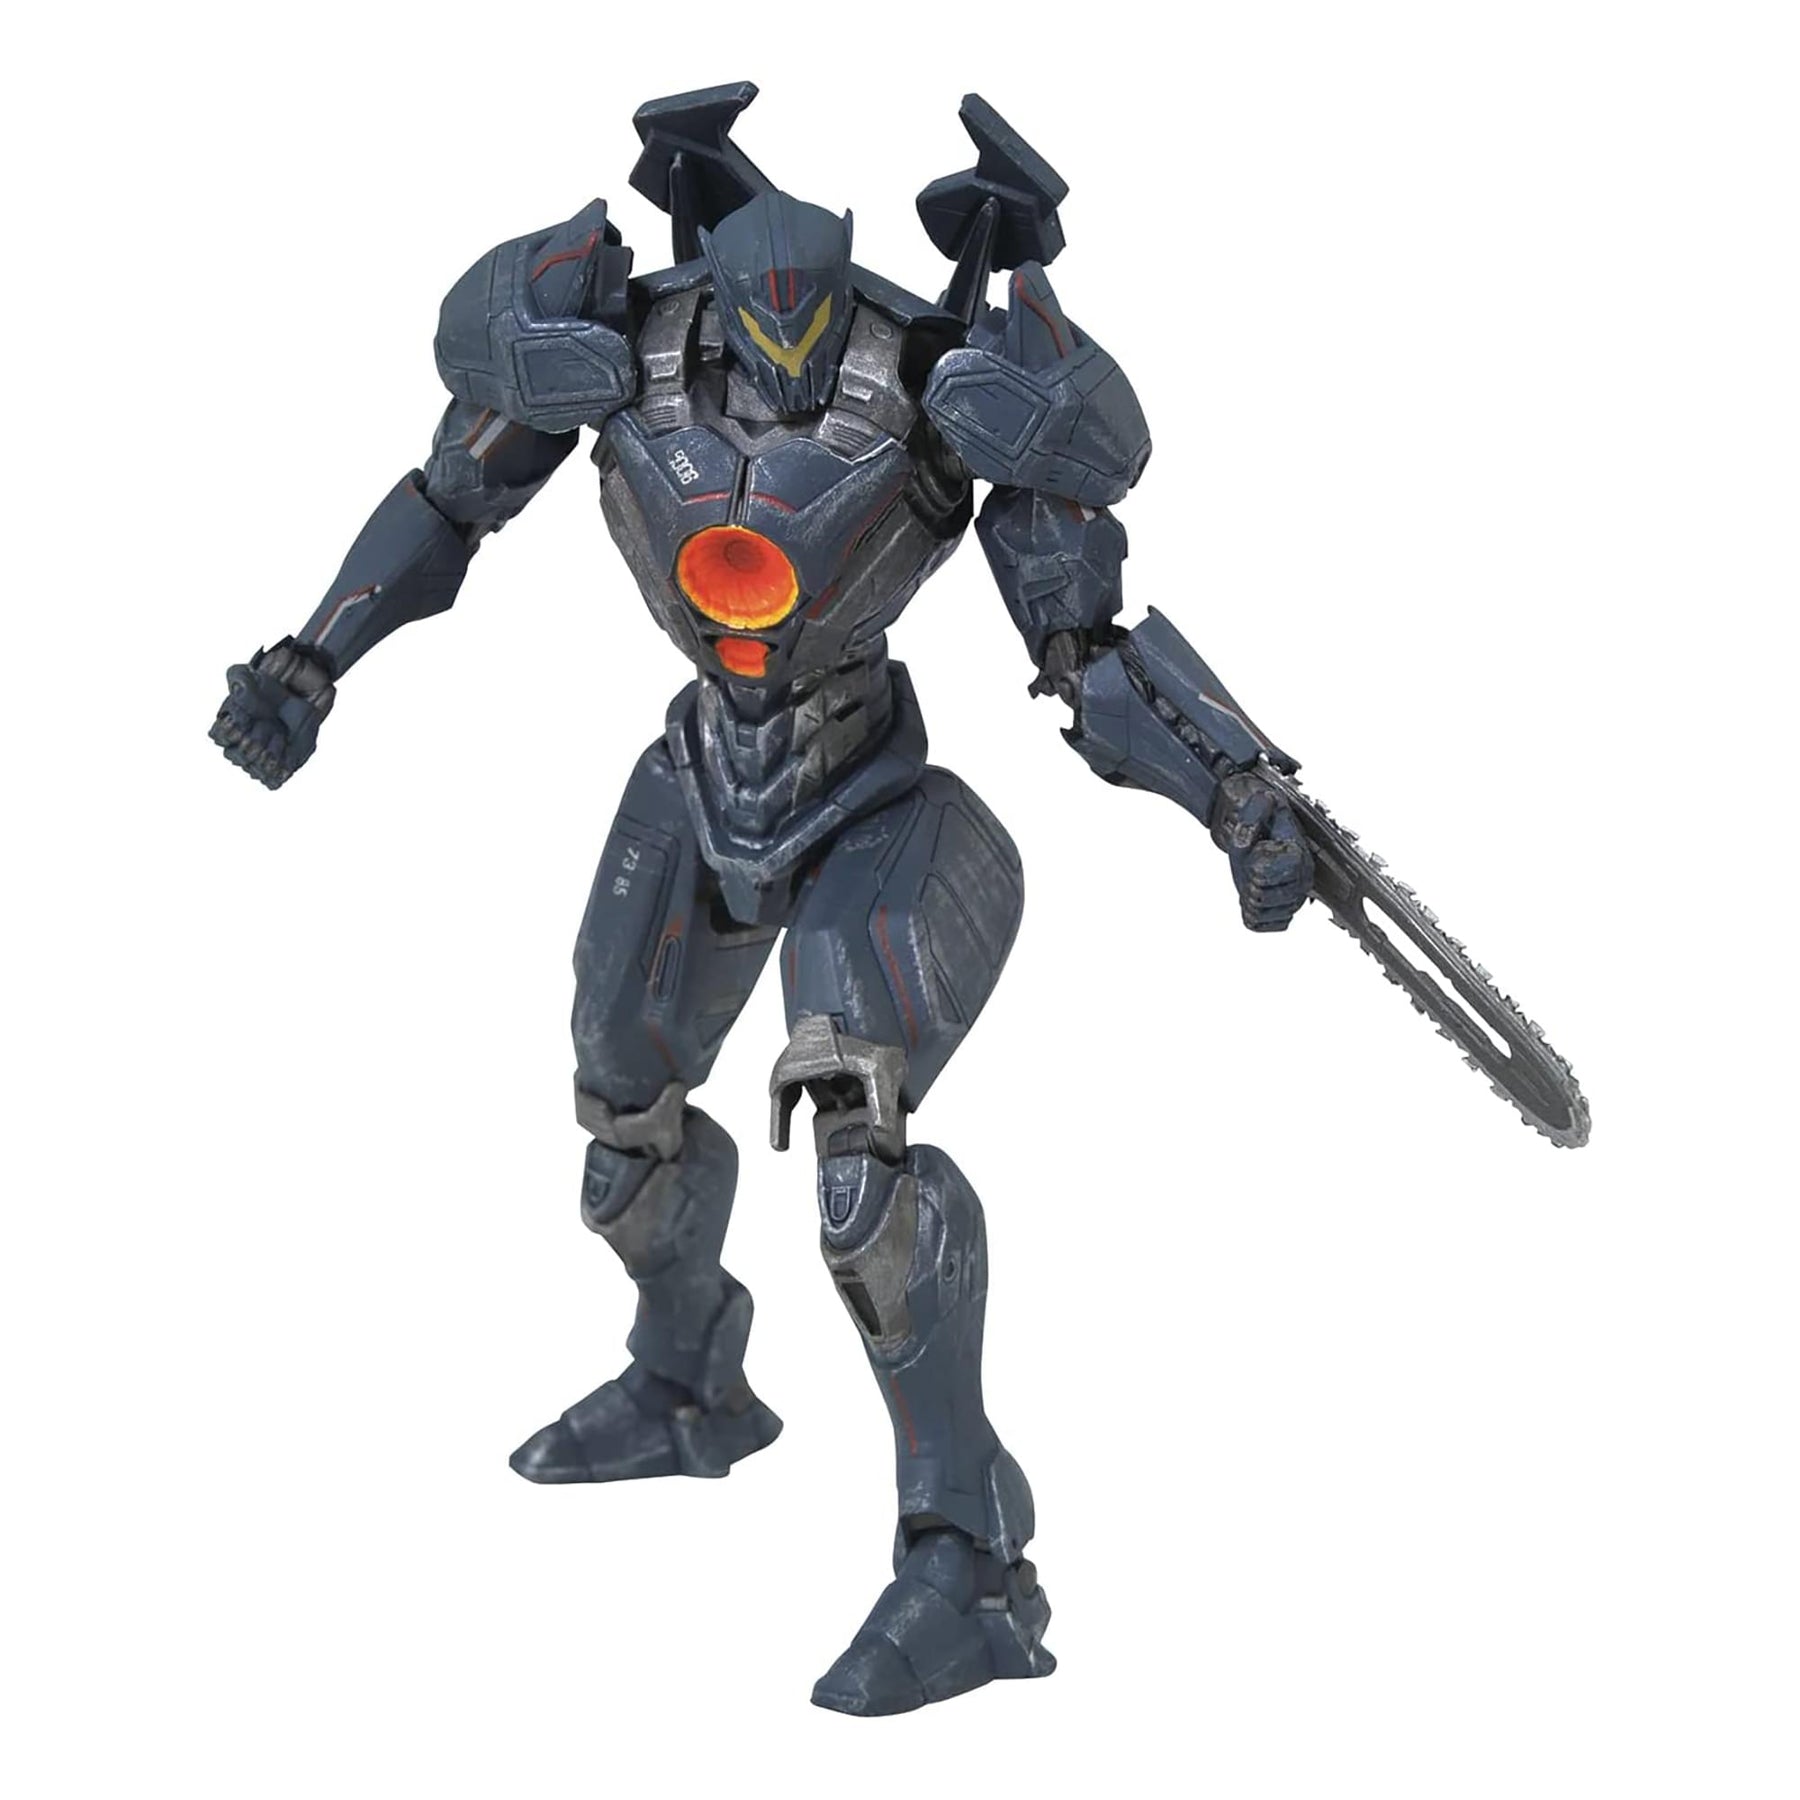 Pacific Rim 2 Deluxe Series 1 Action Figure | Gipsy Avenger